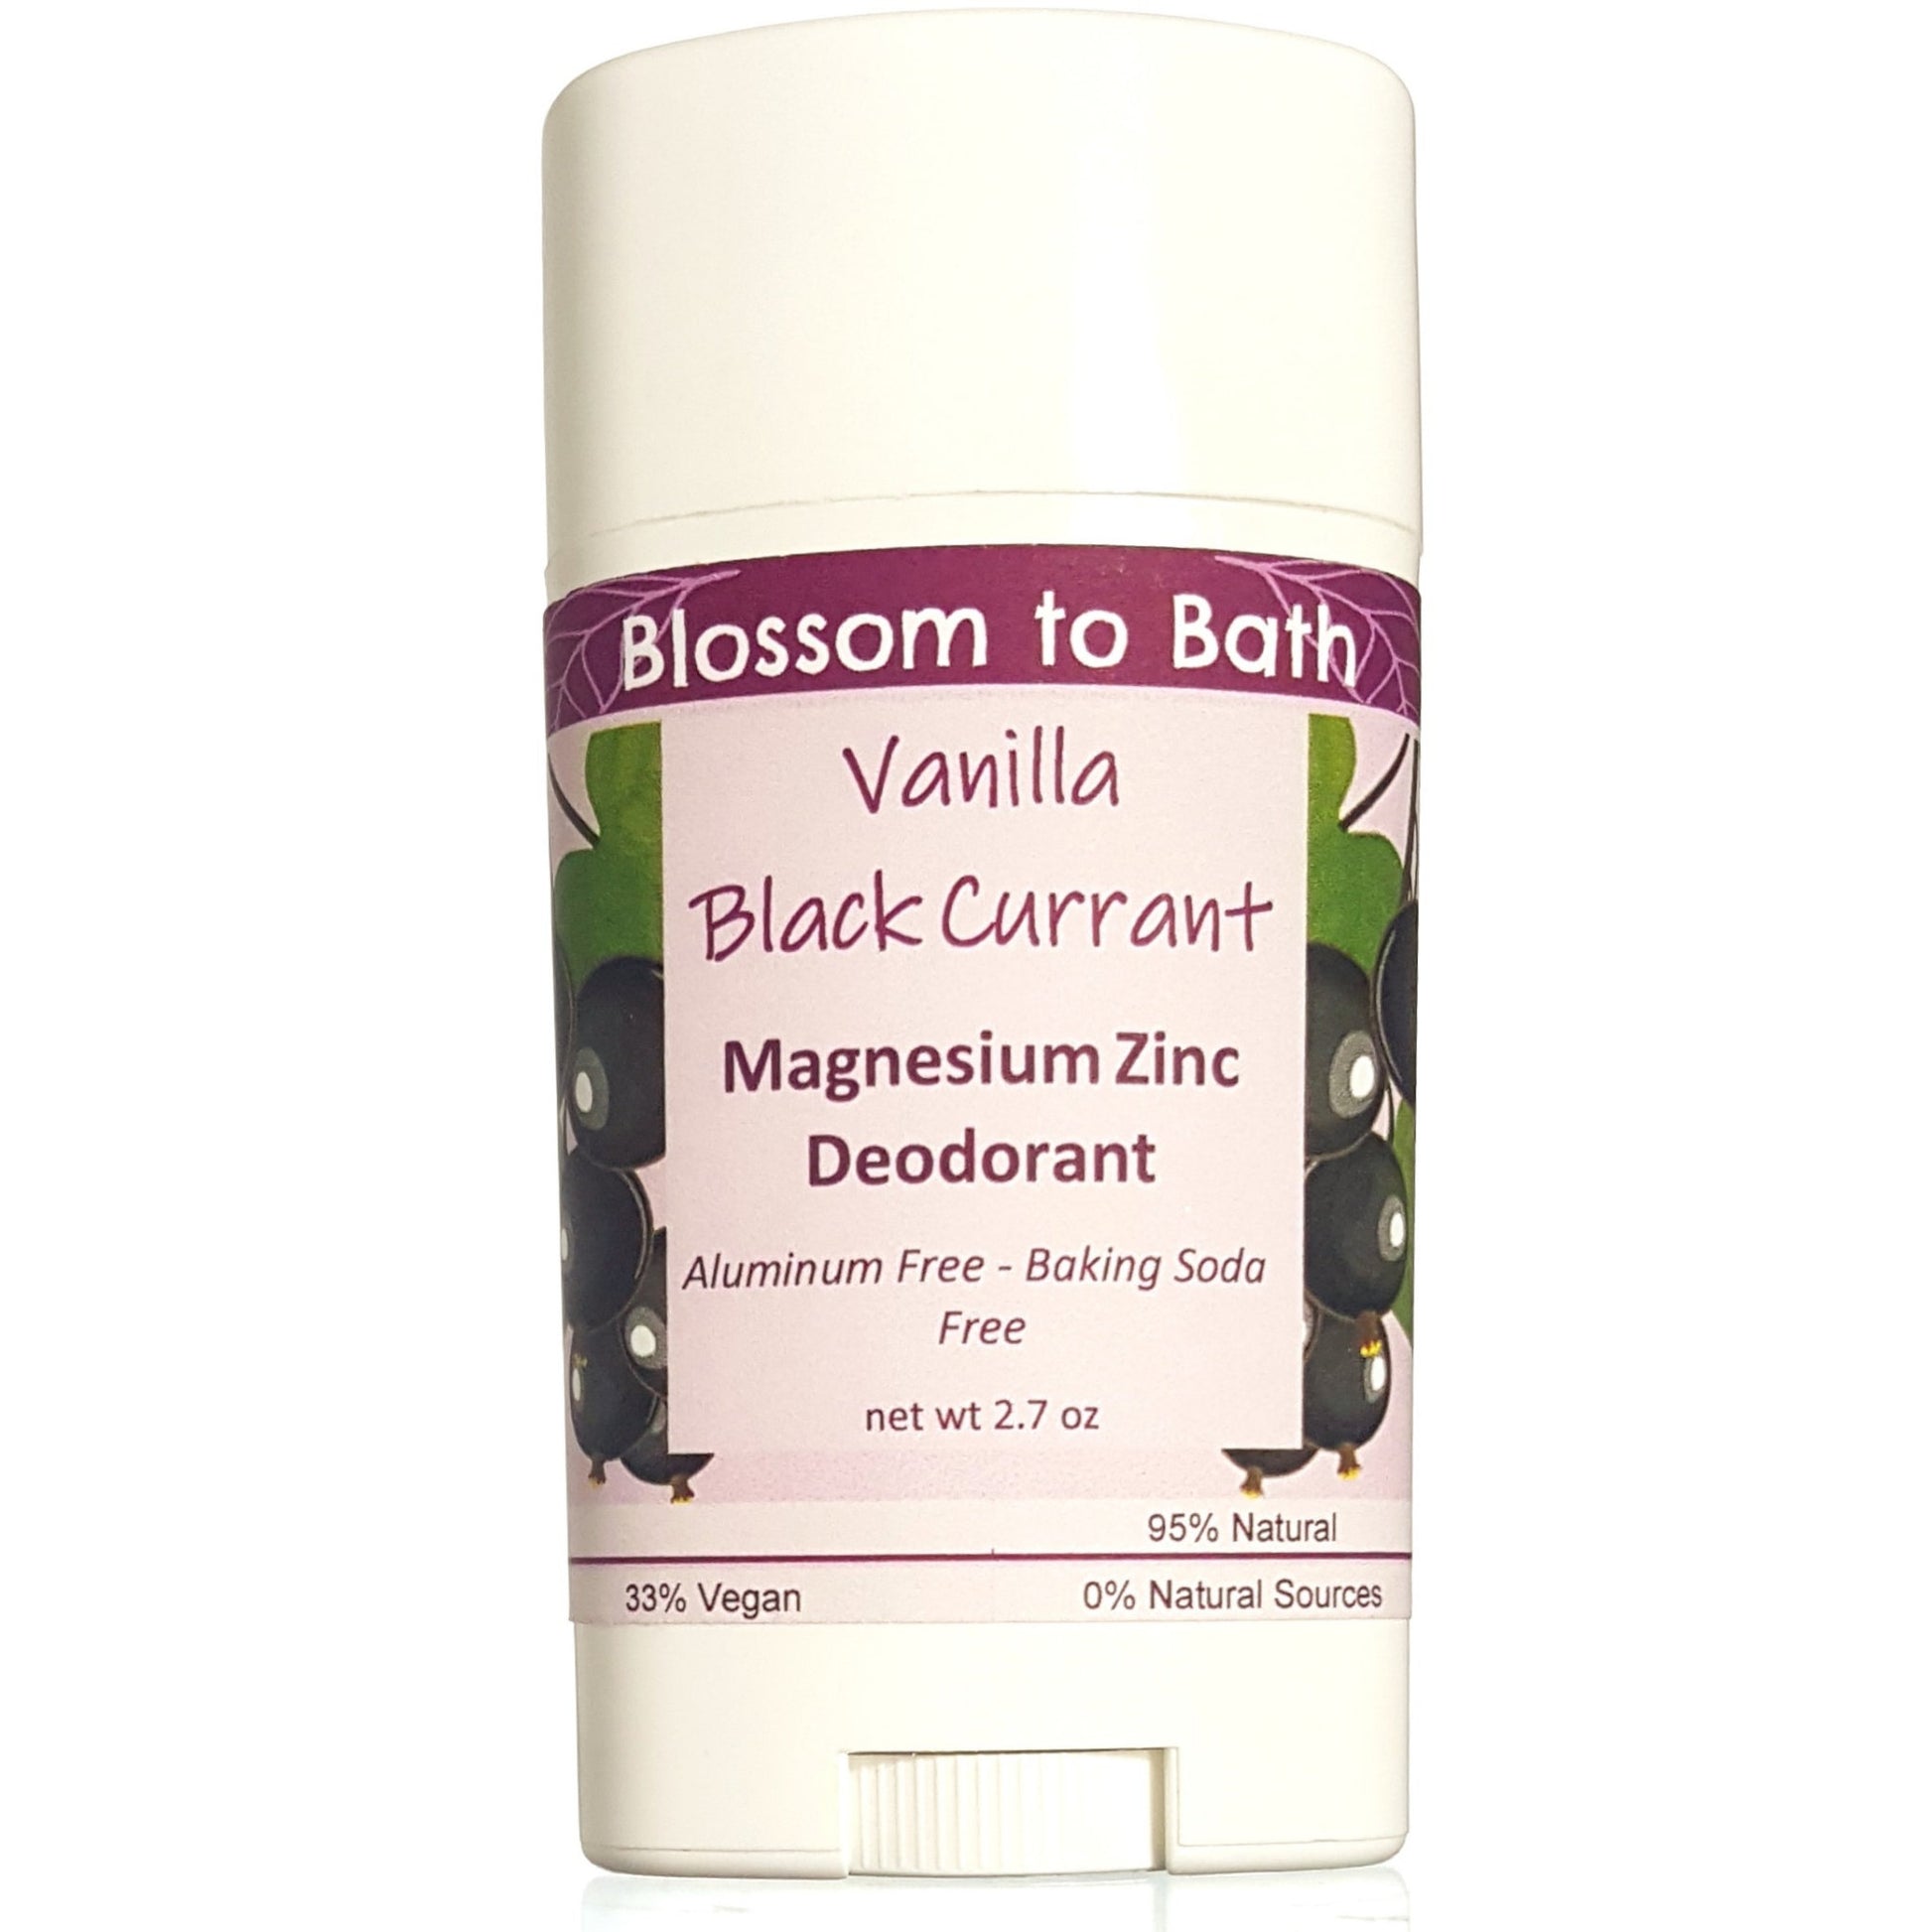 Buy Blossom to Bath Vanilla Black Currant Magnesium Zinc Deodorant from Flowersong Soap Studio.  Long lasting protection made from organic botanicals and butters, made without baking soda, tested in the Arizona heat  A sensuous rich berry scent with a hint of vanilla and a twist of freshness.